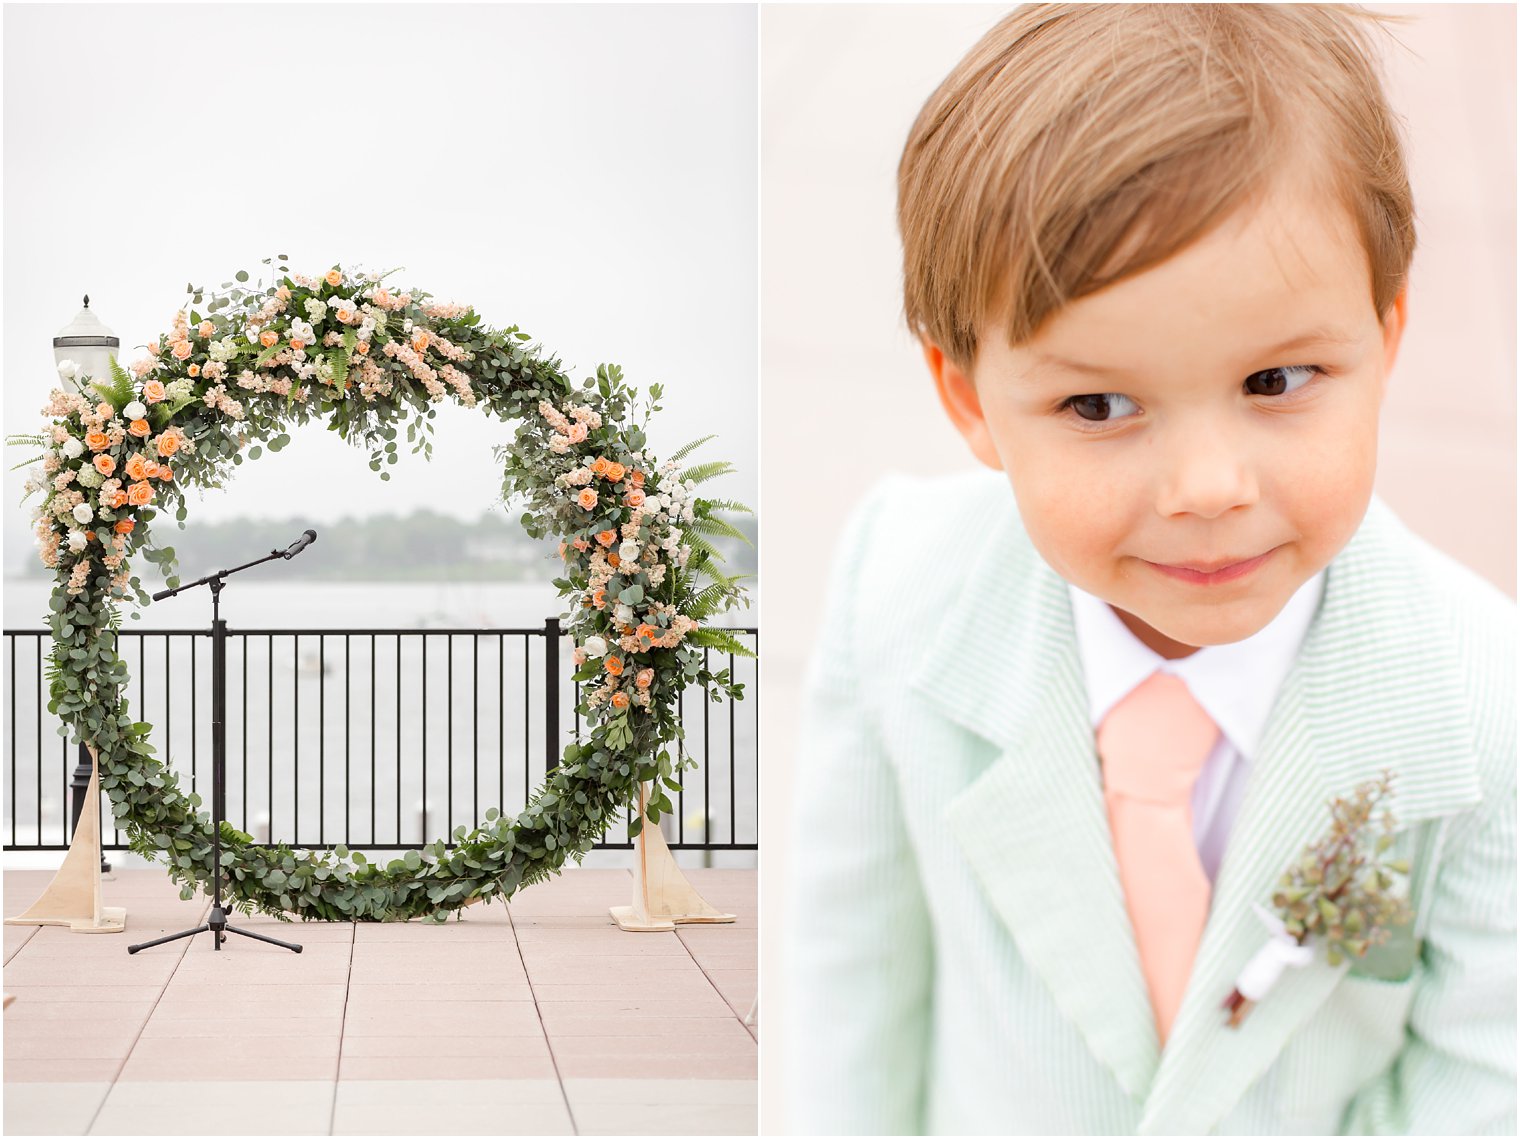 Giant floral wreath at outdoor ceremony and ring bearer in searsucker suit